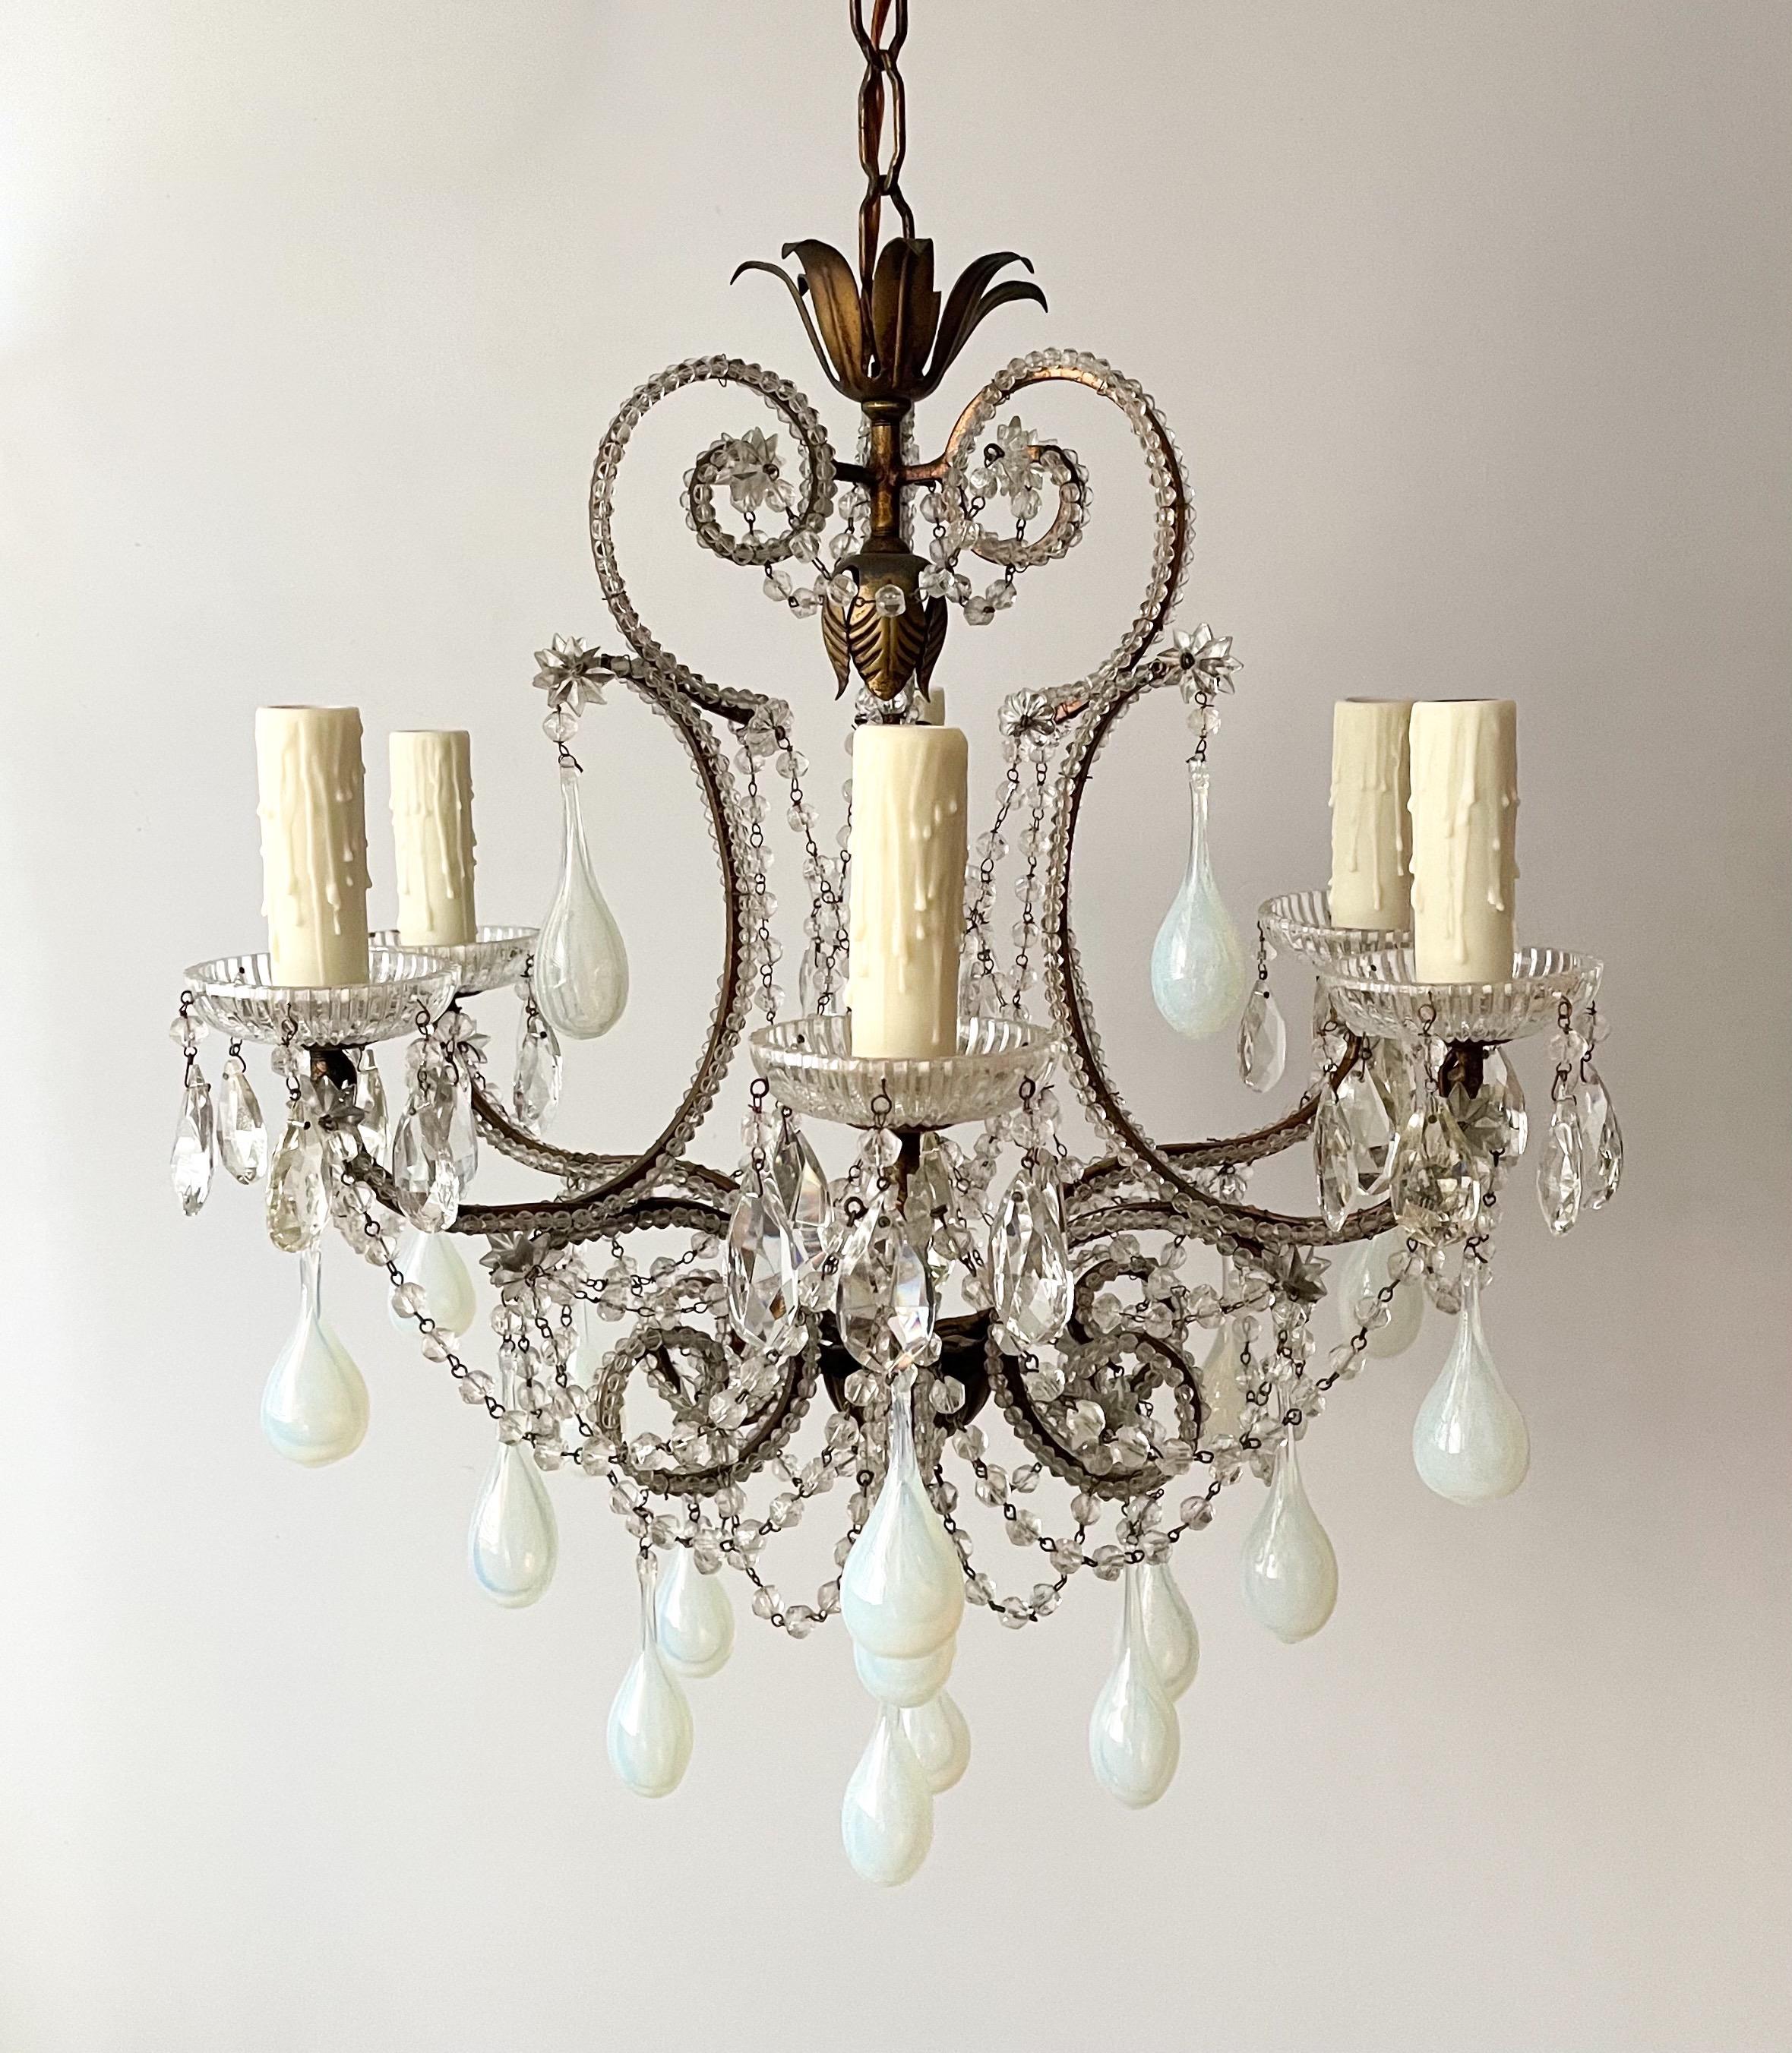 Beautiful, petite-scale, Italian 1940s gilt-iron and crystal chandelier with opaline glass drops.

The chandelier consists of scrolled gilt-iron framed outlined with small glass beads and decorated with rare hollow opaline glass drops.

The